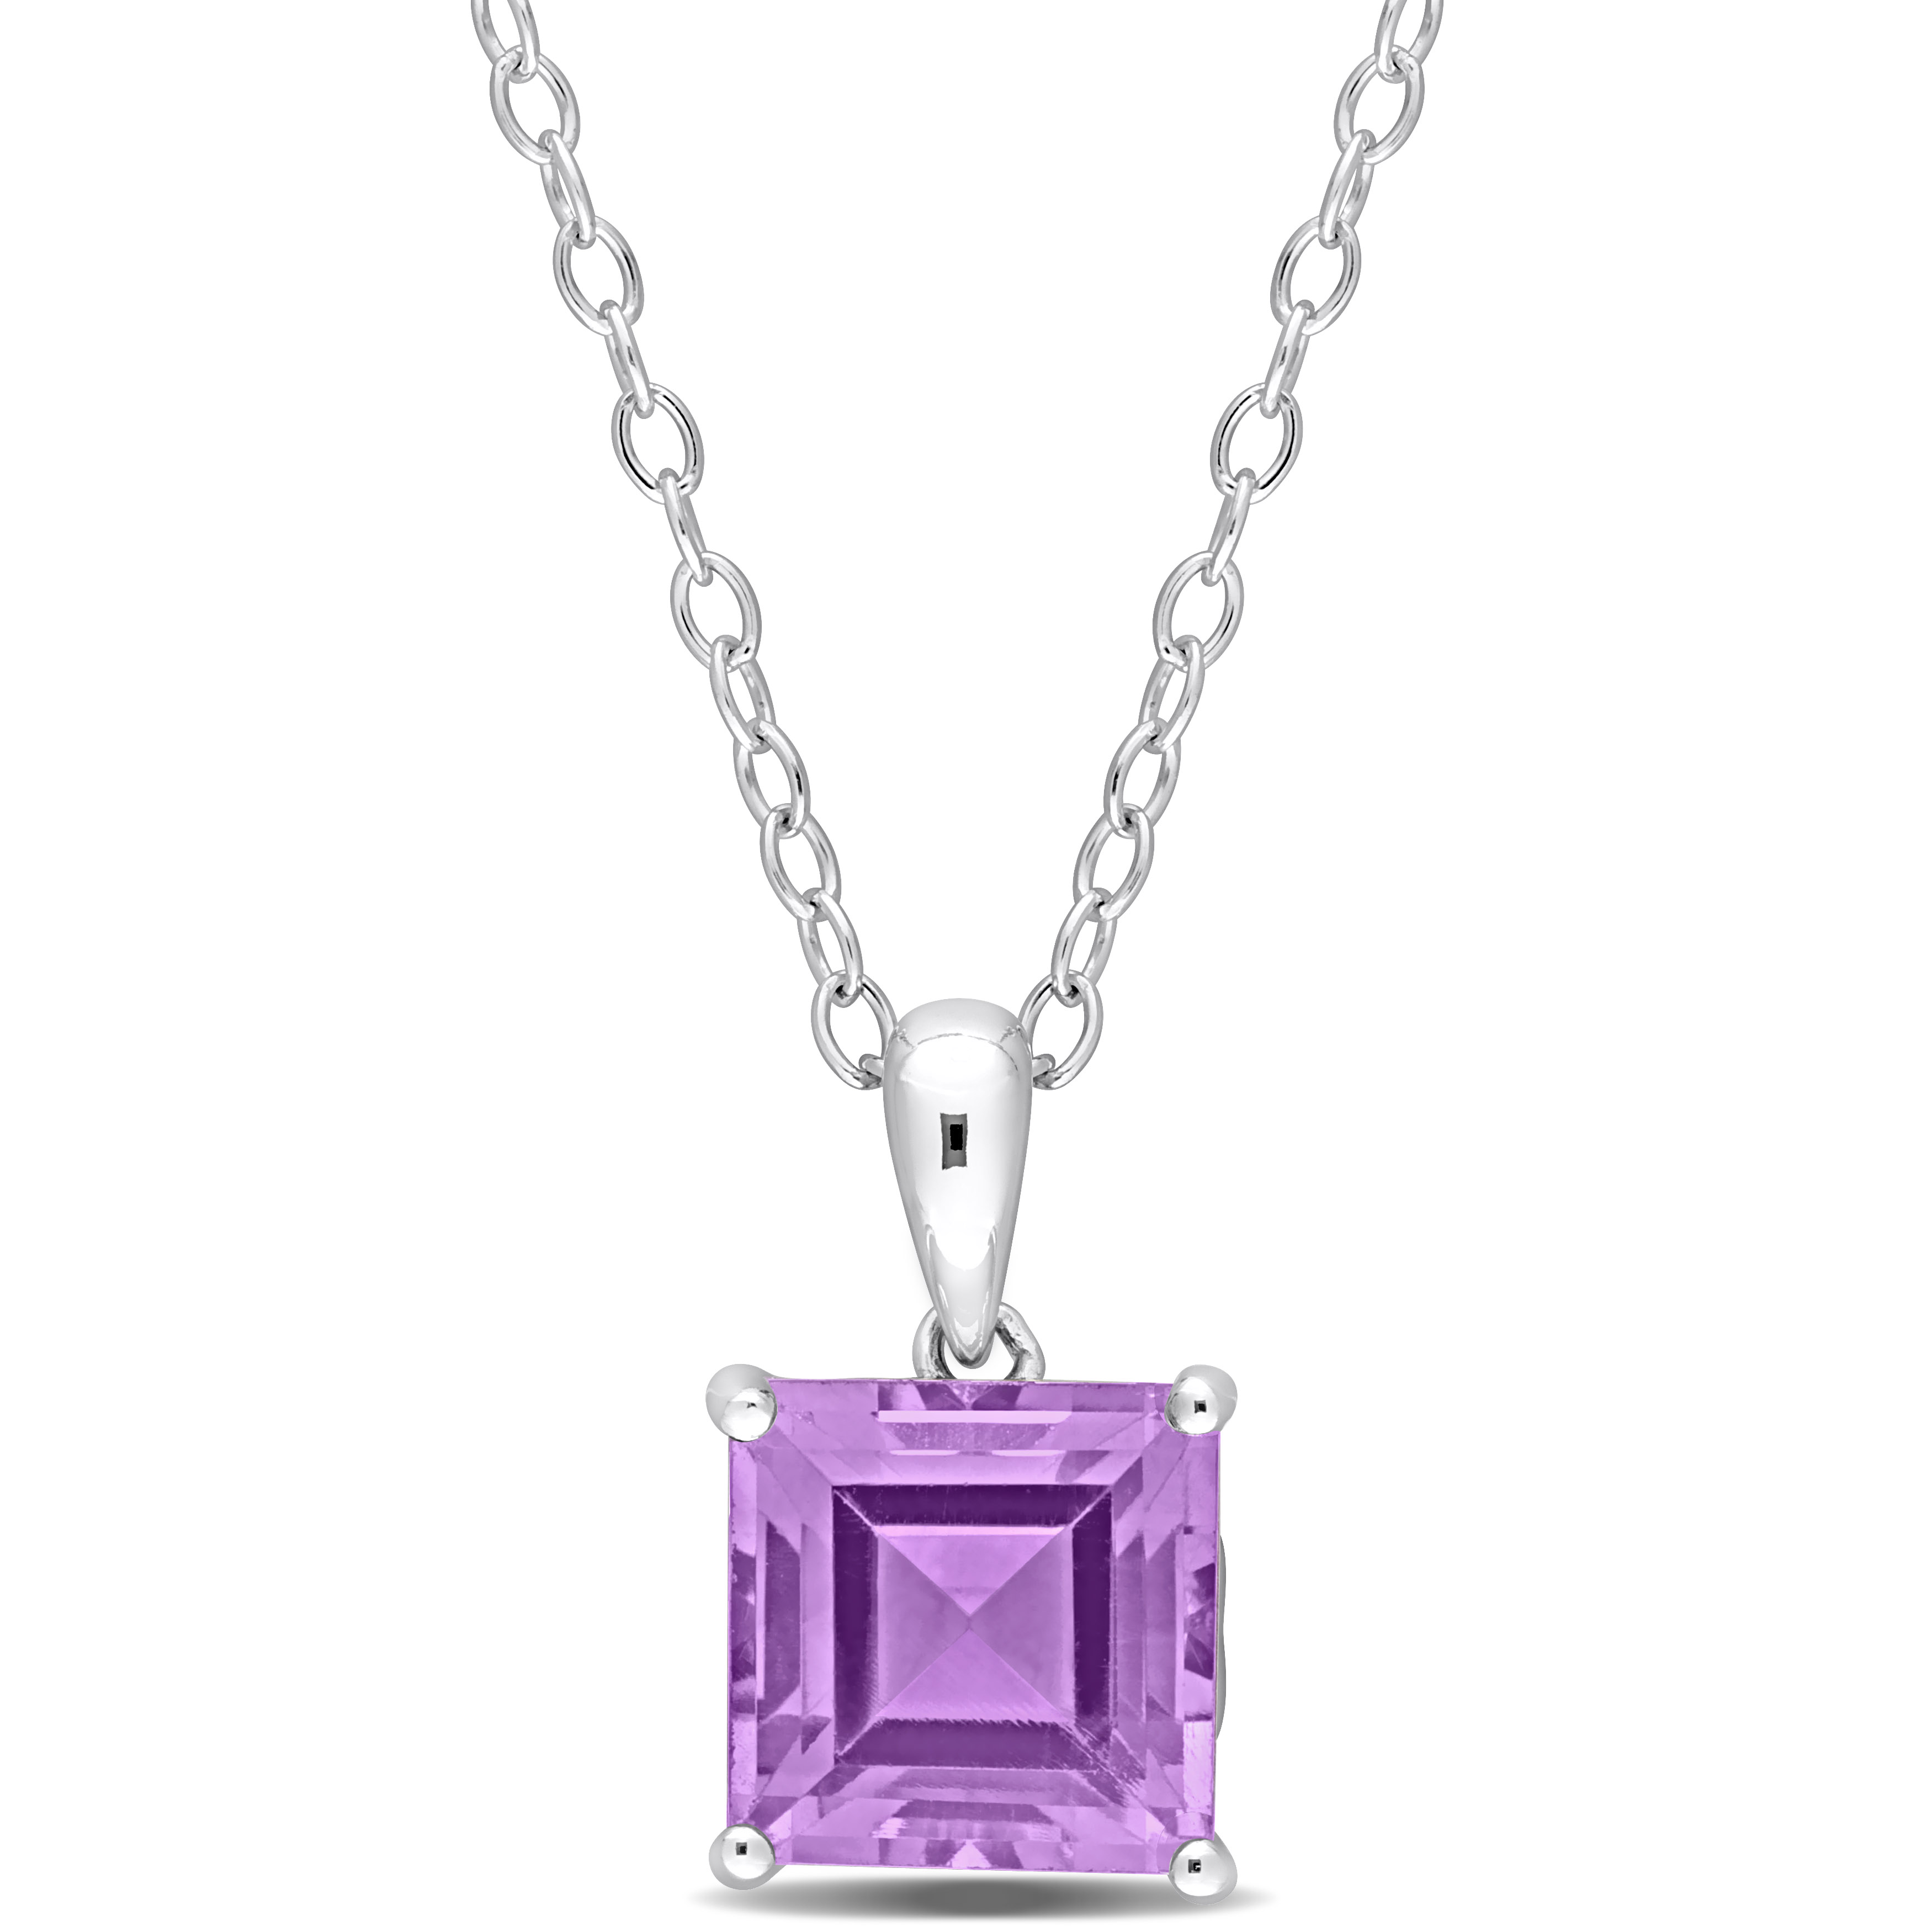 2 1/4 CT TGW Princess Cut Amethyst Solitaire Heart Design Pendant with Chain in Sterling Silver - 18 in.